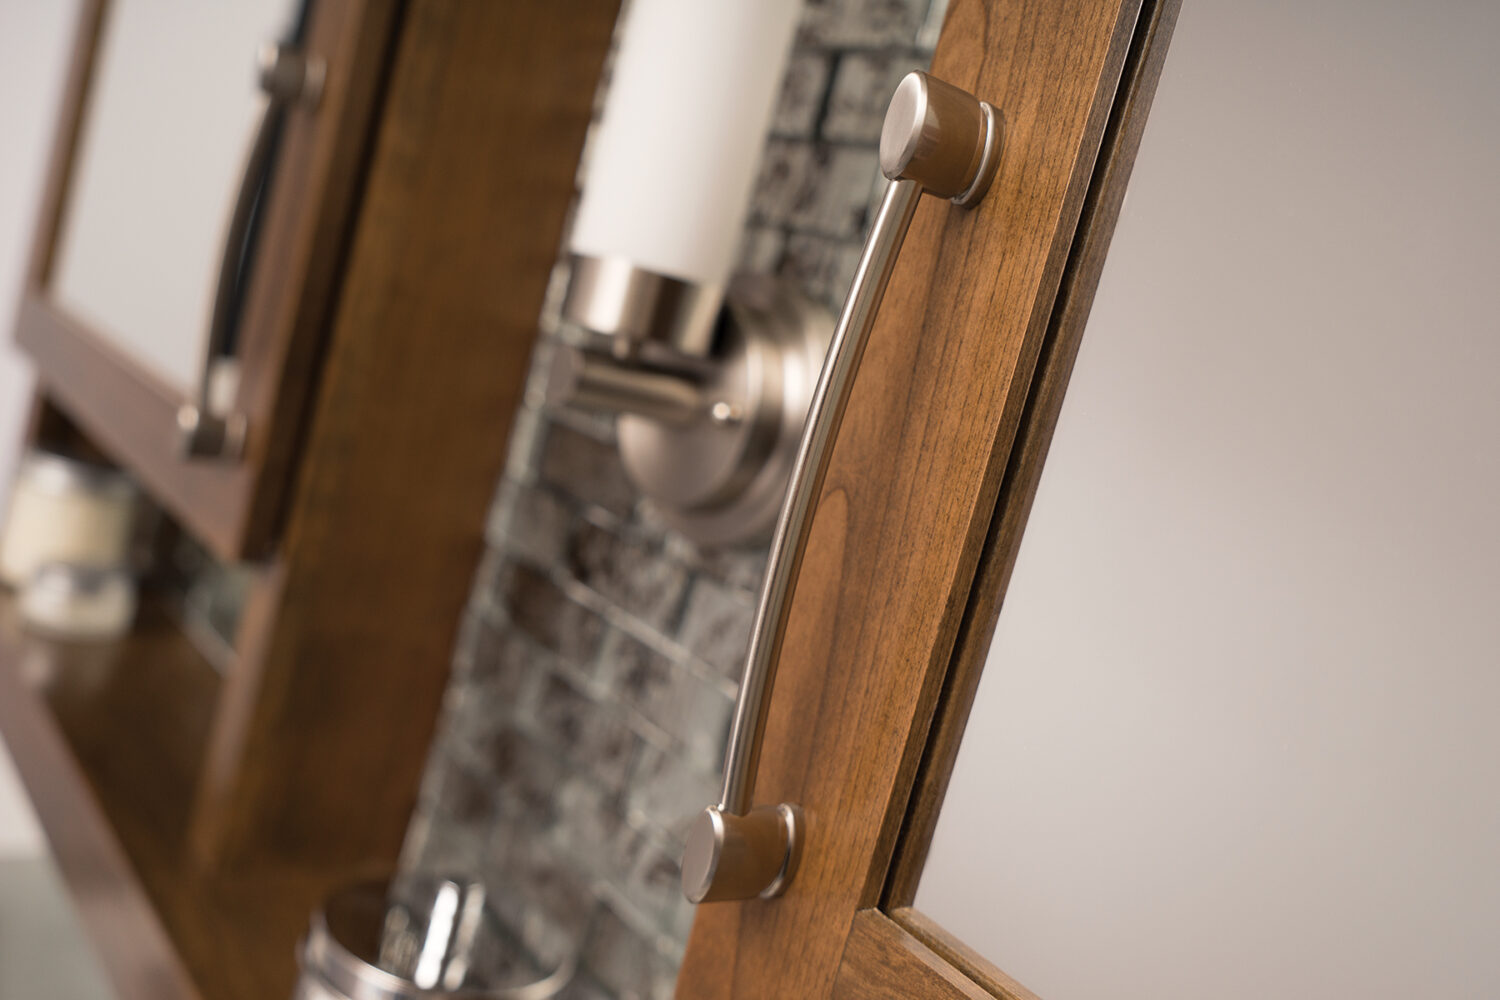 Medicine cabinet mirrors for a modern style bathroom furniture collection.